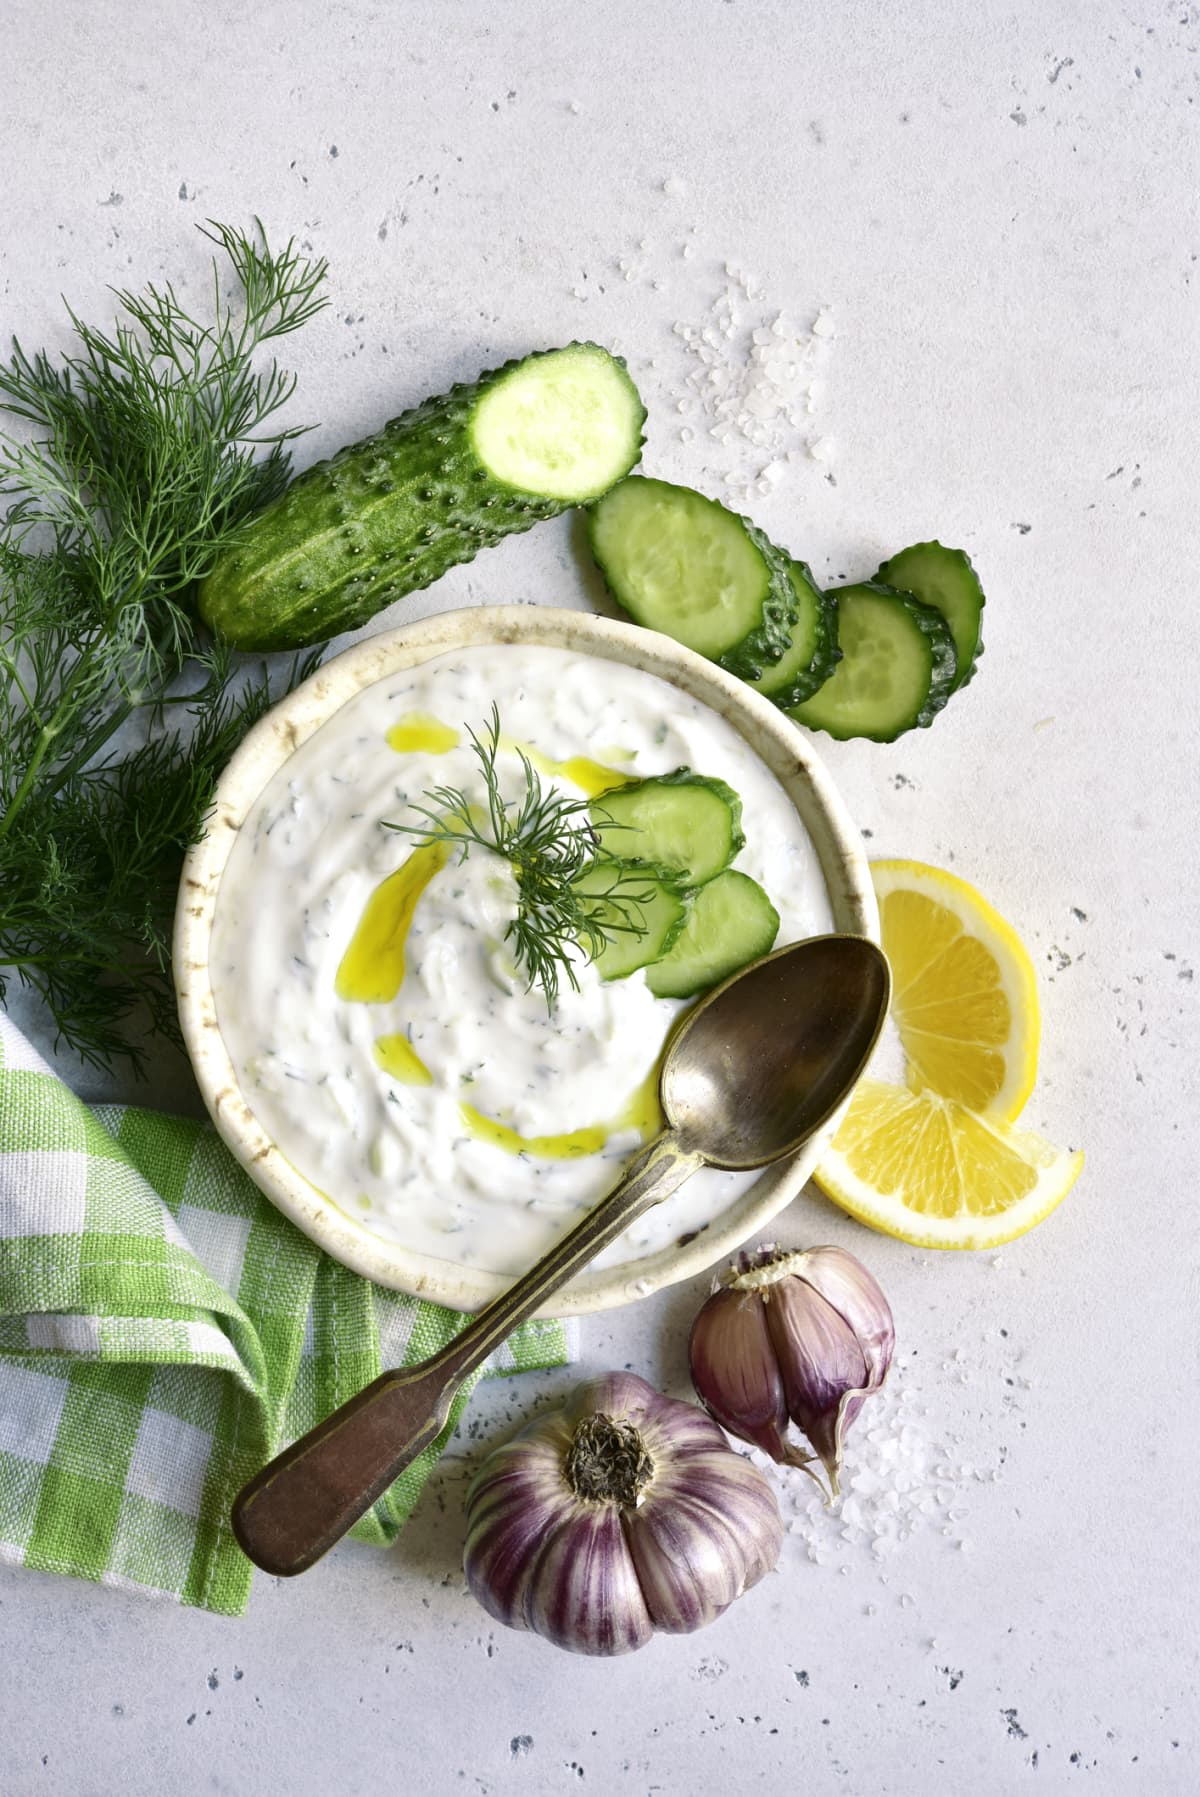 Tzatziki - traditional greek yogurt sauce in a bowl on a white slate, stone or concrete background. Top view with copy space.